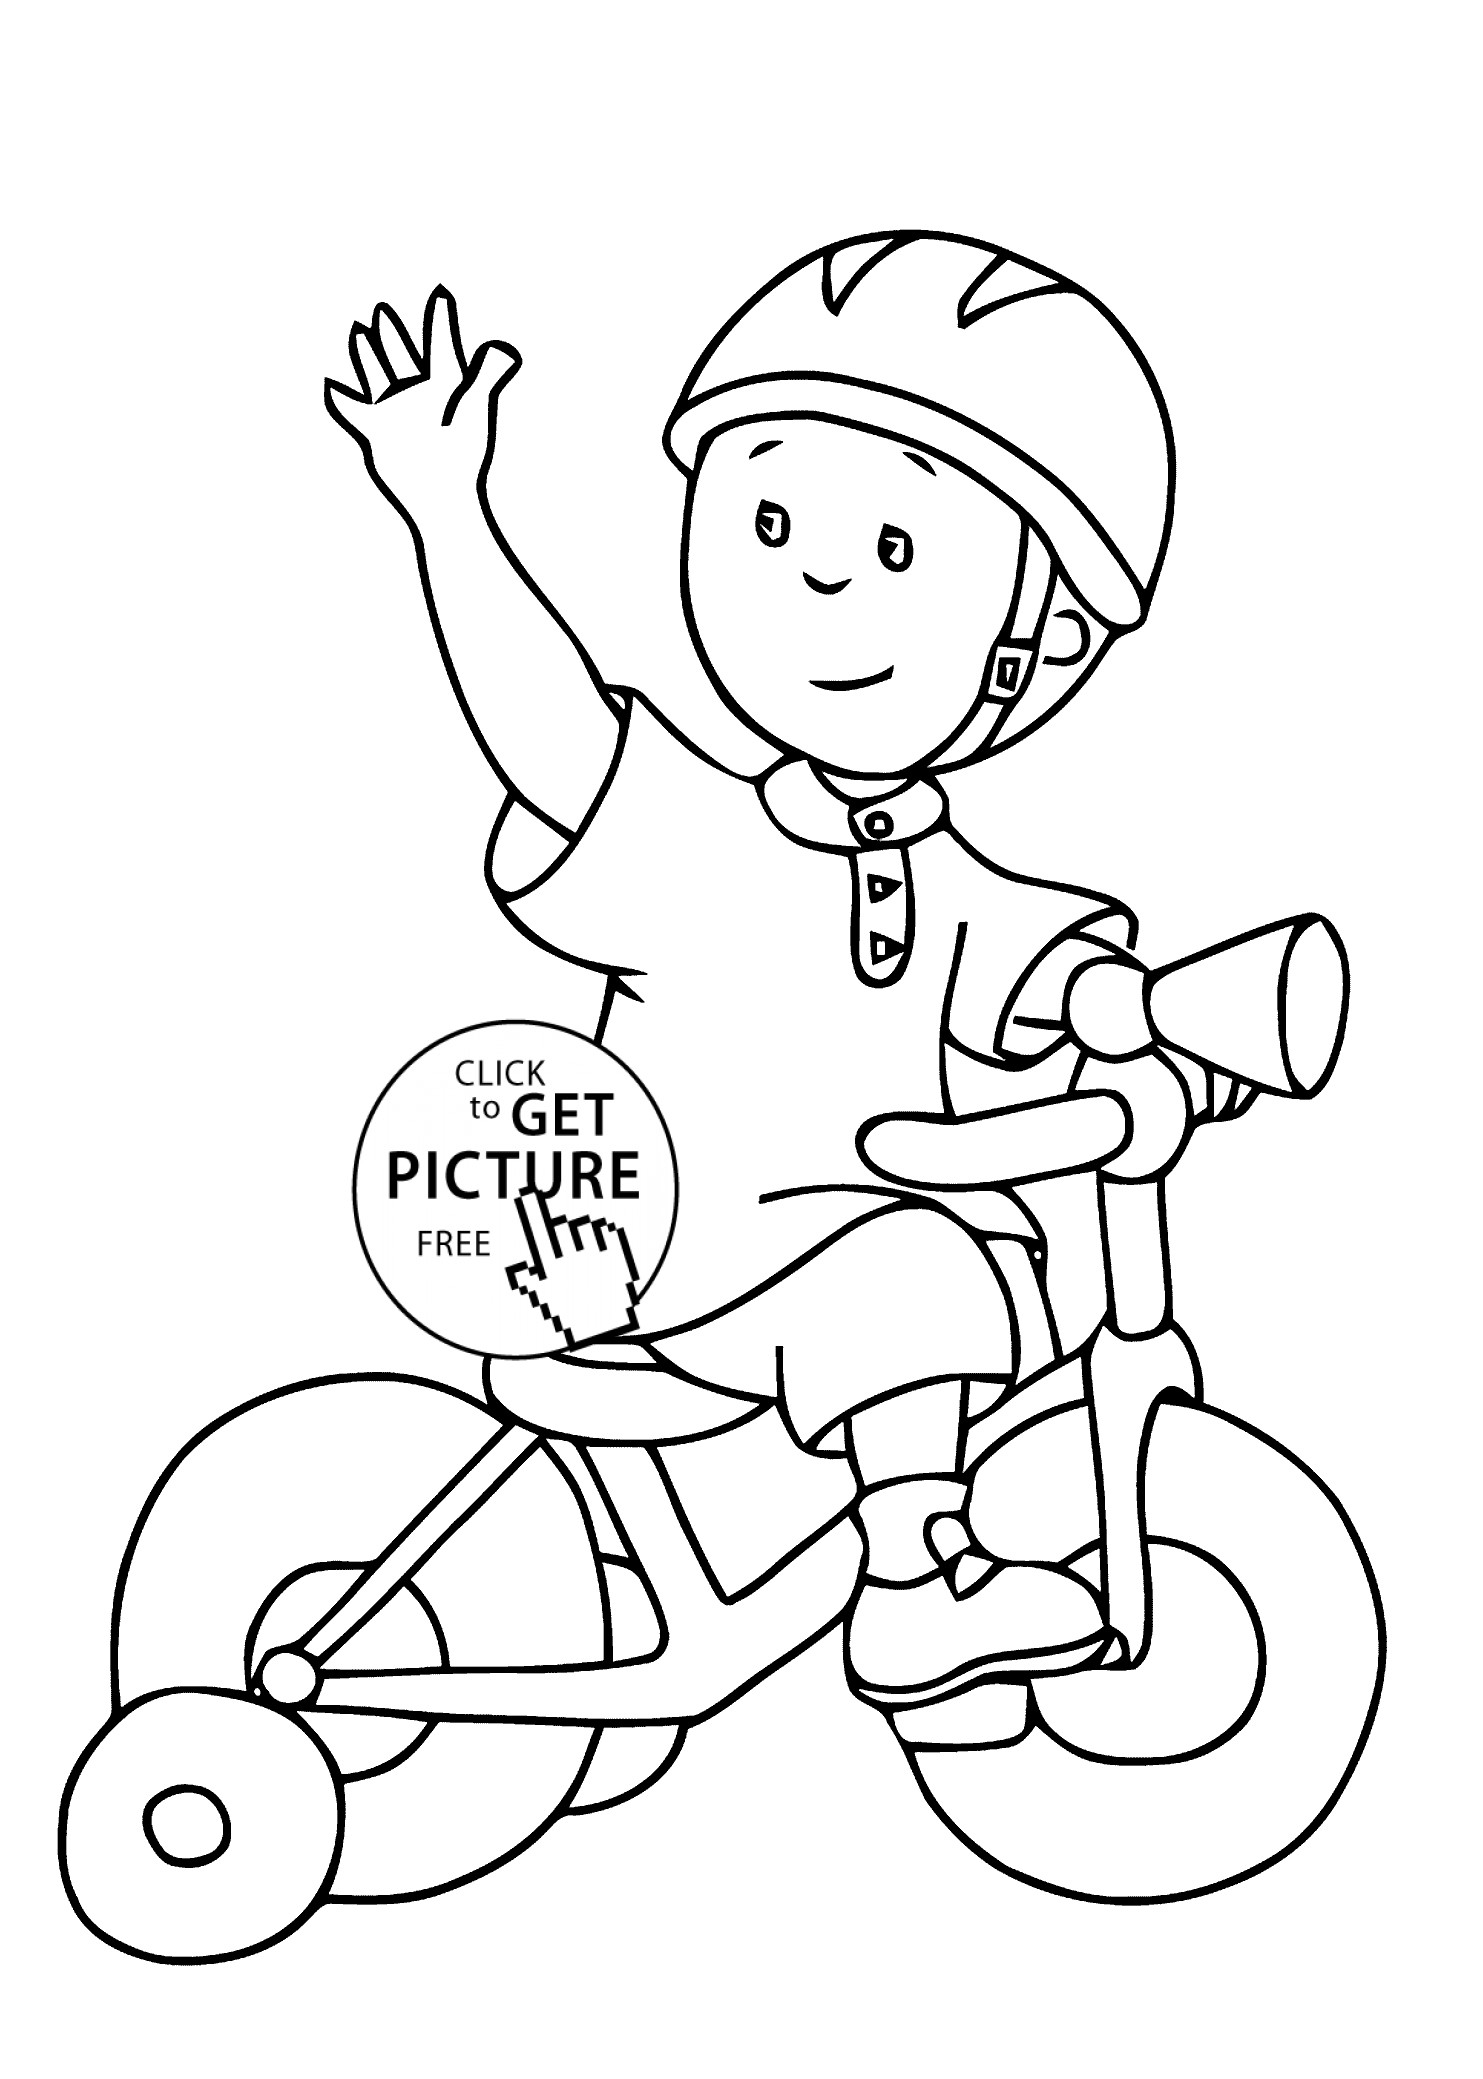 Printable Coloring Pages For Toddlers
 Caillou coloring pages for kids printable free